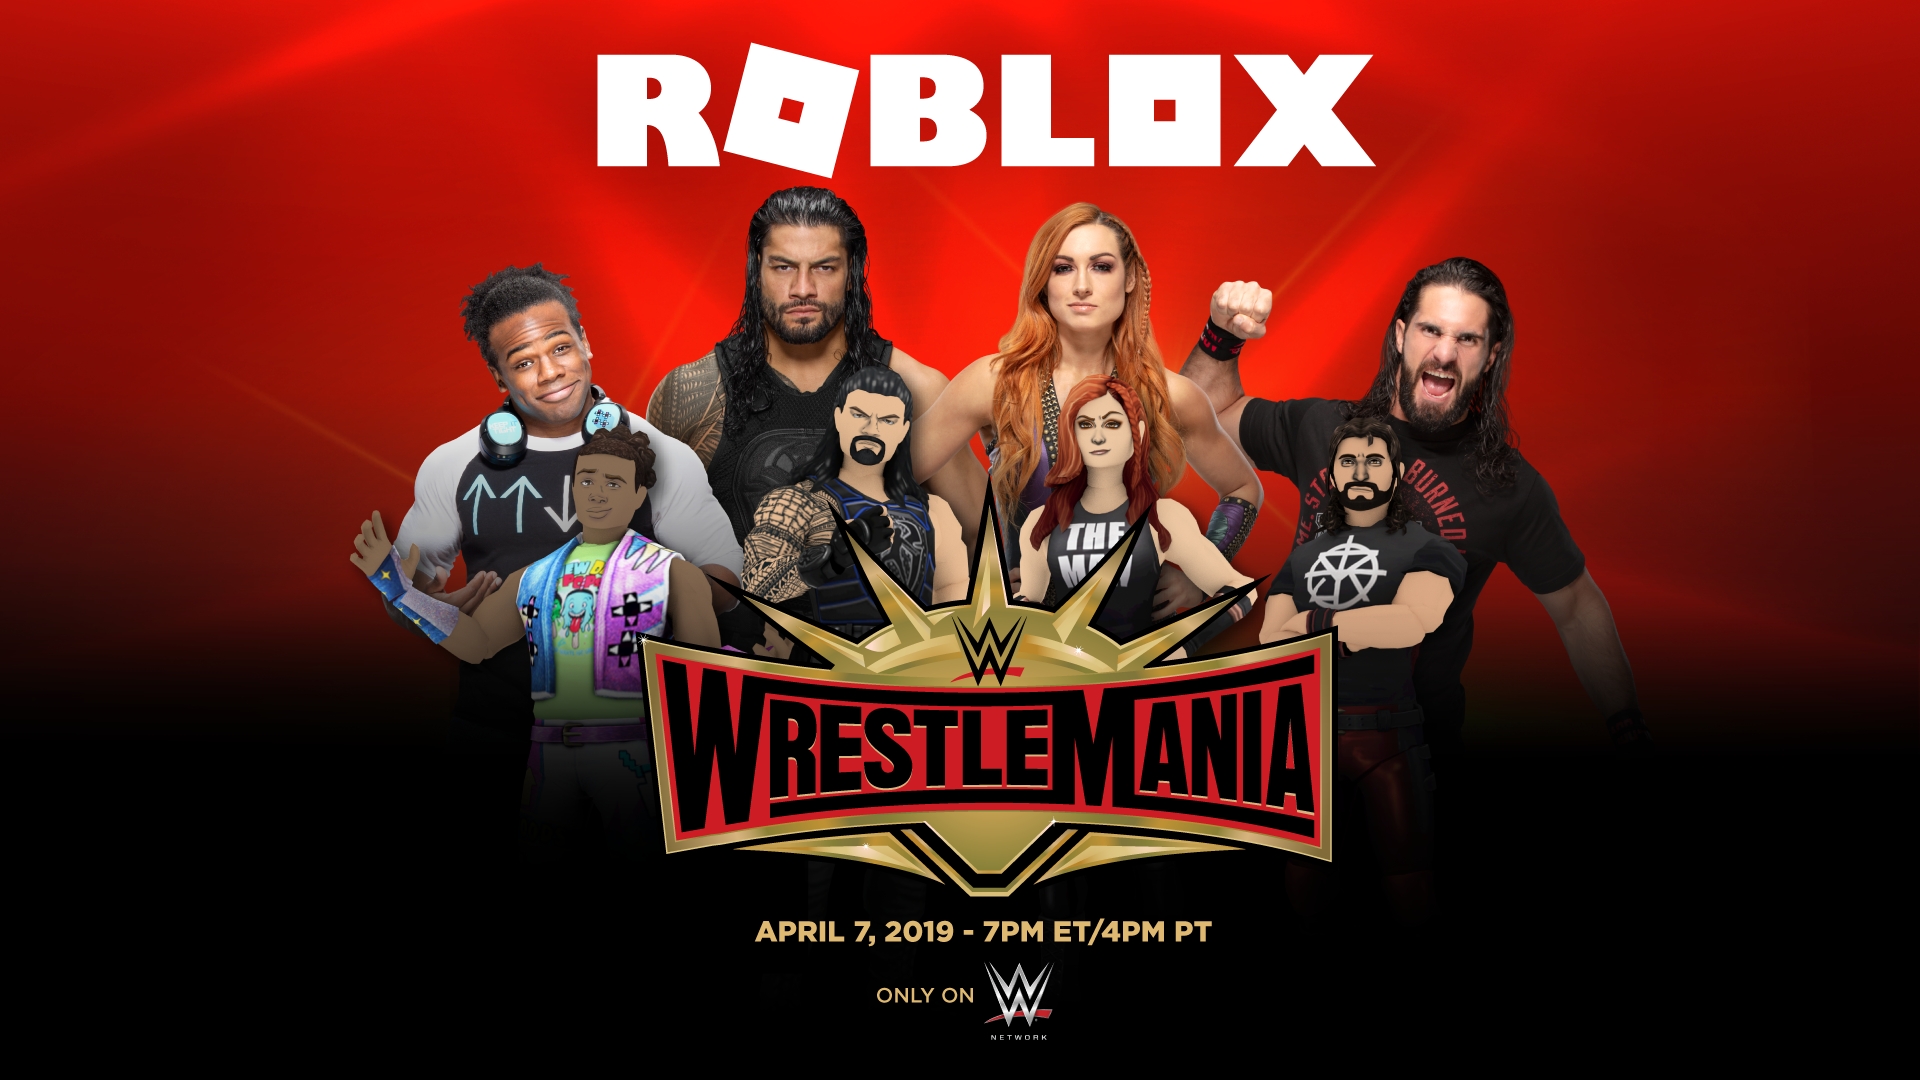 Roblox And Wwe Partner To Celebrate Wrestlemania Business Wire - wwe roblox picture id